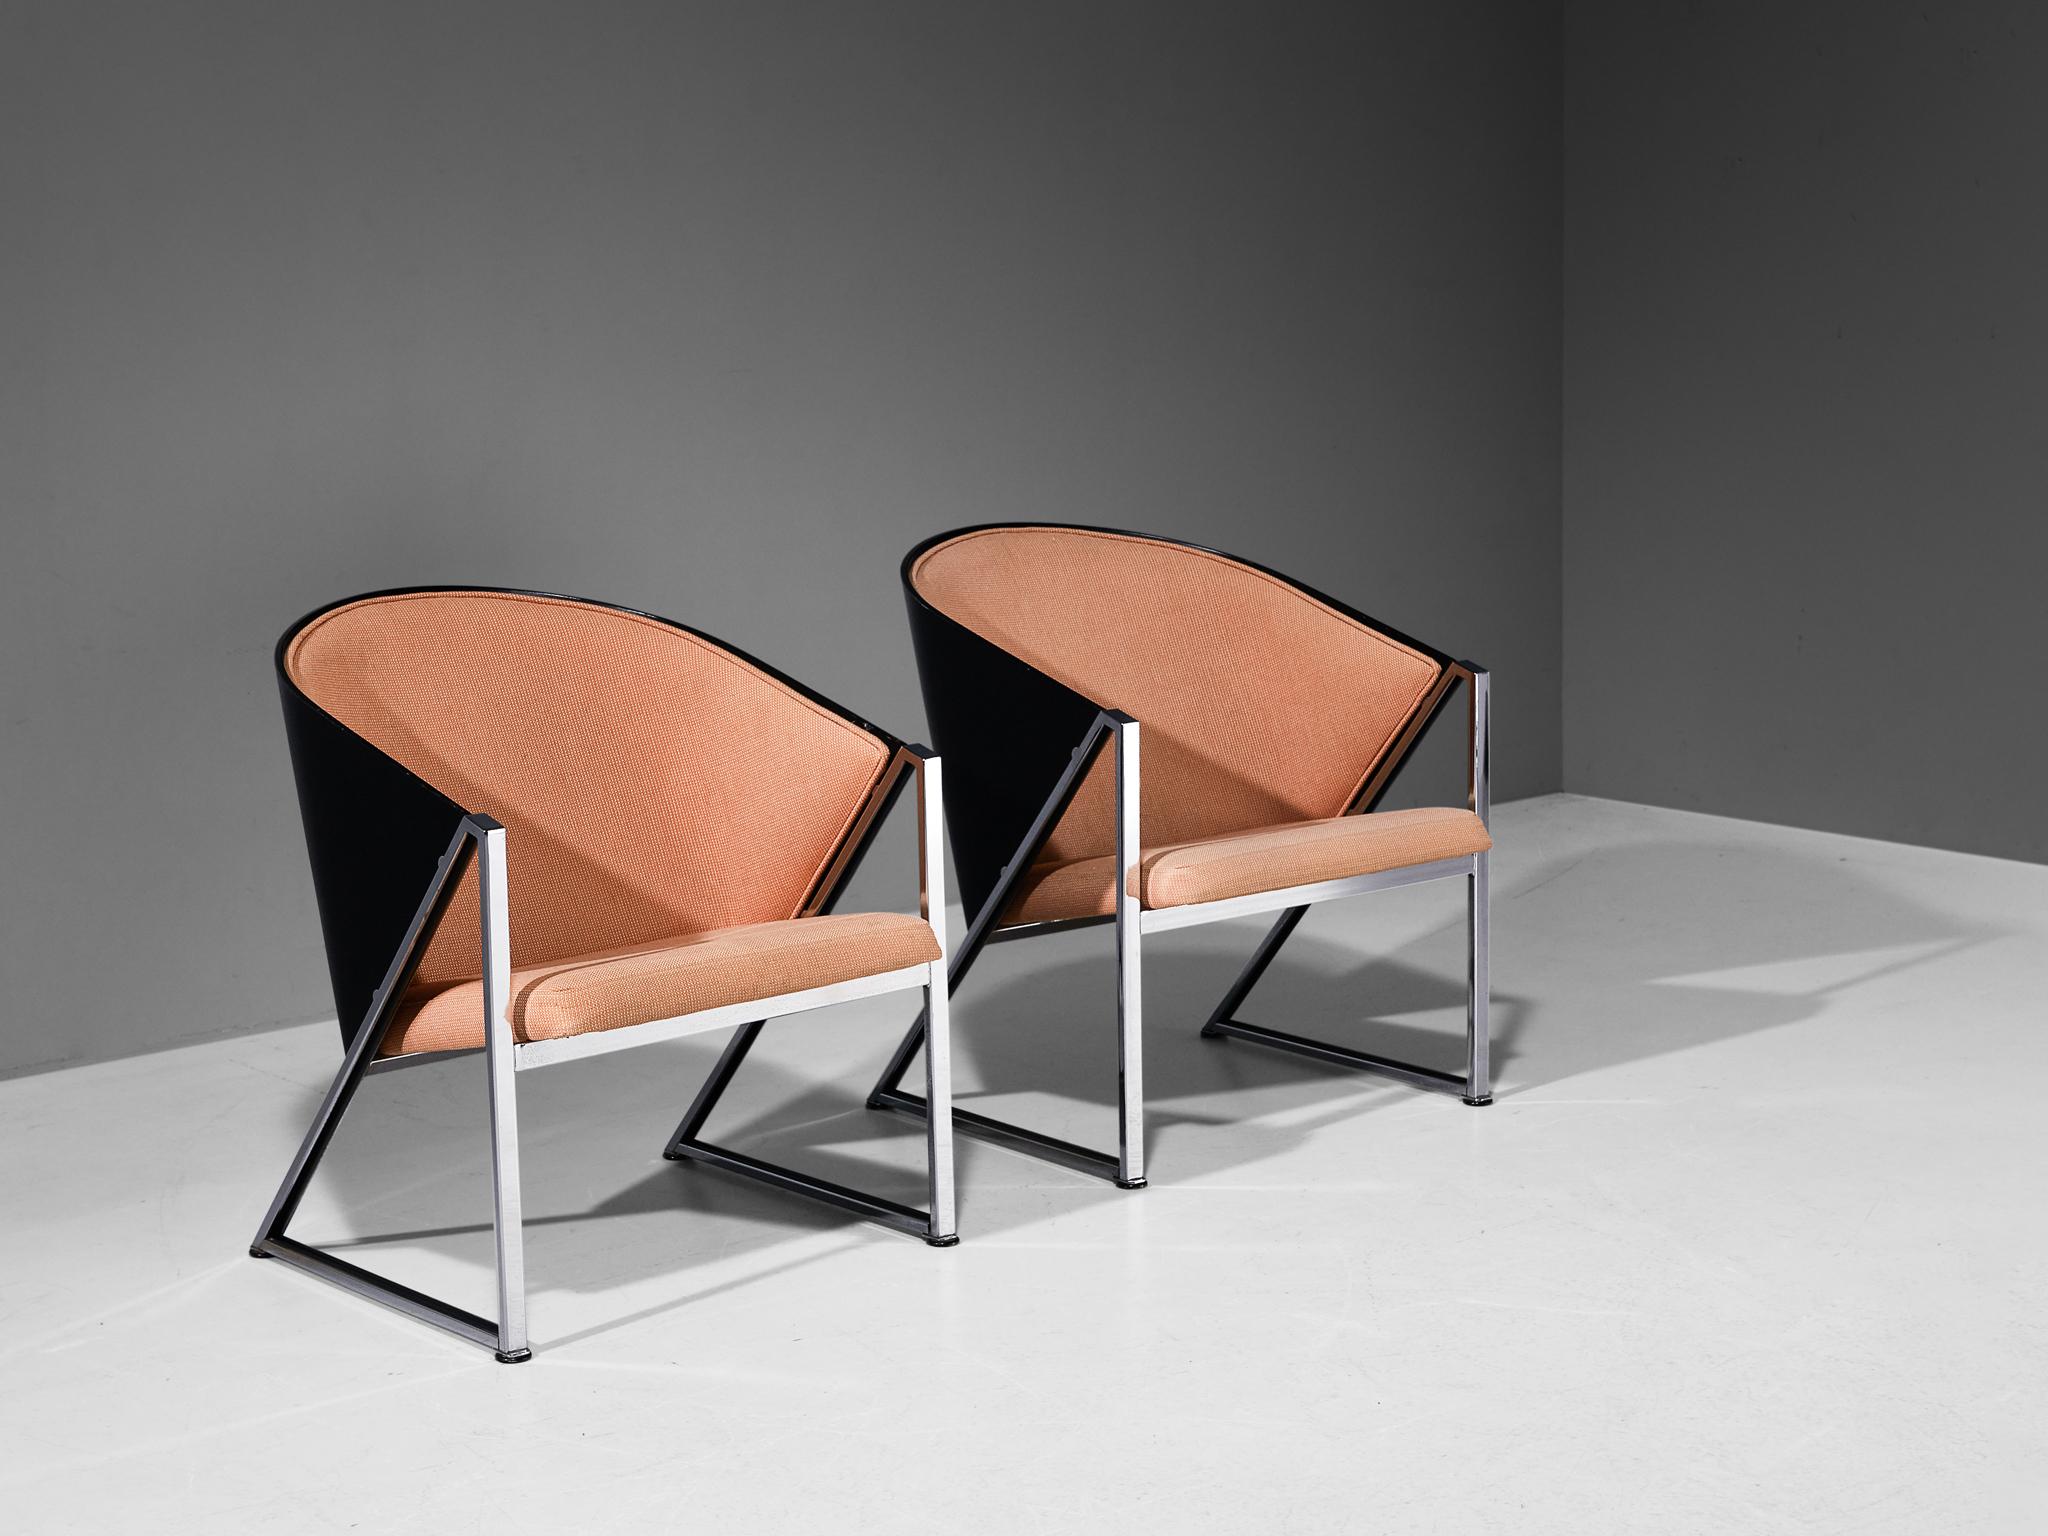 Jouko Järvisalo for Inno Interior OY, armchairs model 'Mondi Soft', chrome-plated metal, fabric, lacquered wood, Finland, design 1986 

Finnish interior architect Jouko Järvisalo created these lounge chairs that feature an unconventional form.